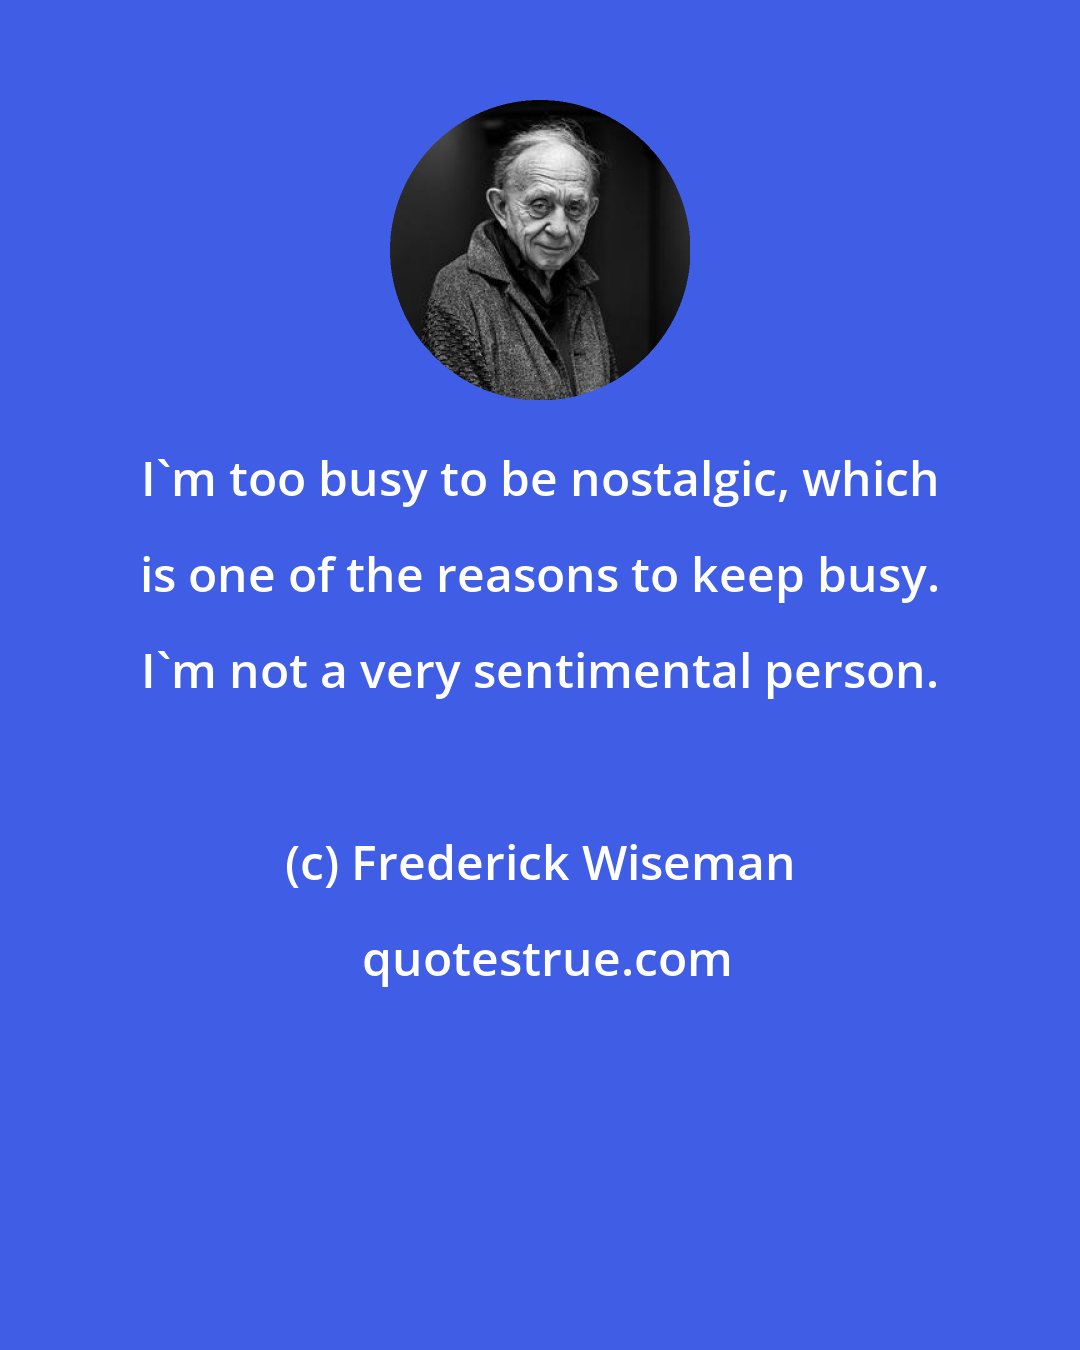 Frederick Wiseman: I'm too busy to be nostalgic, which is one of the reasons to keep busy. I'm not a very sentimental person.